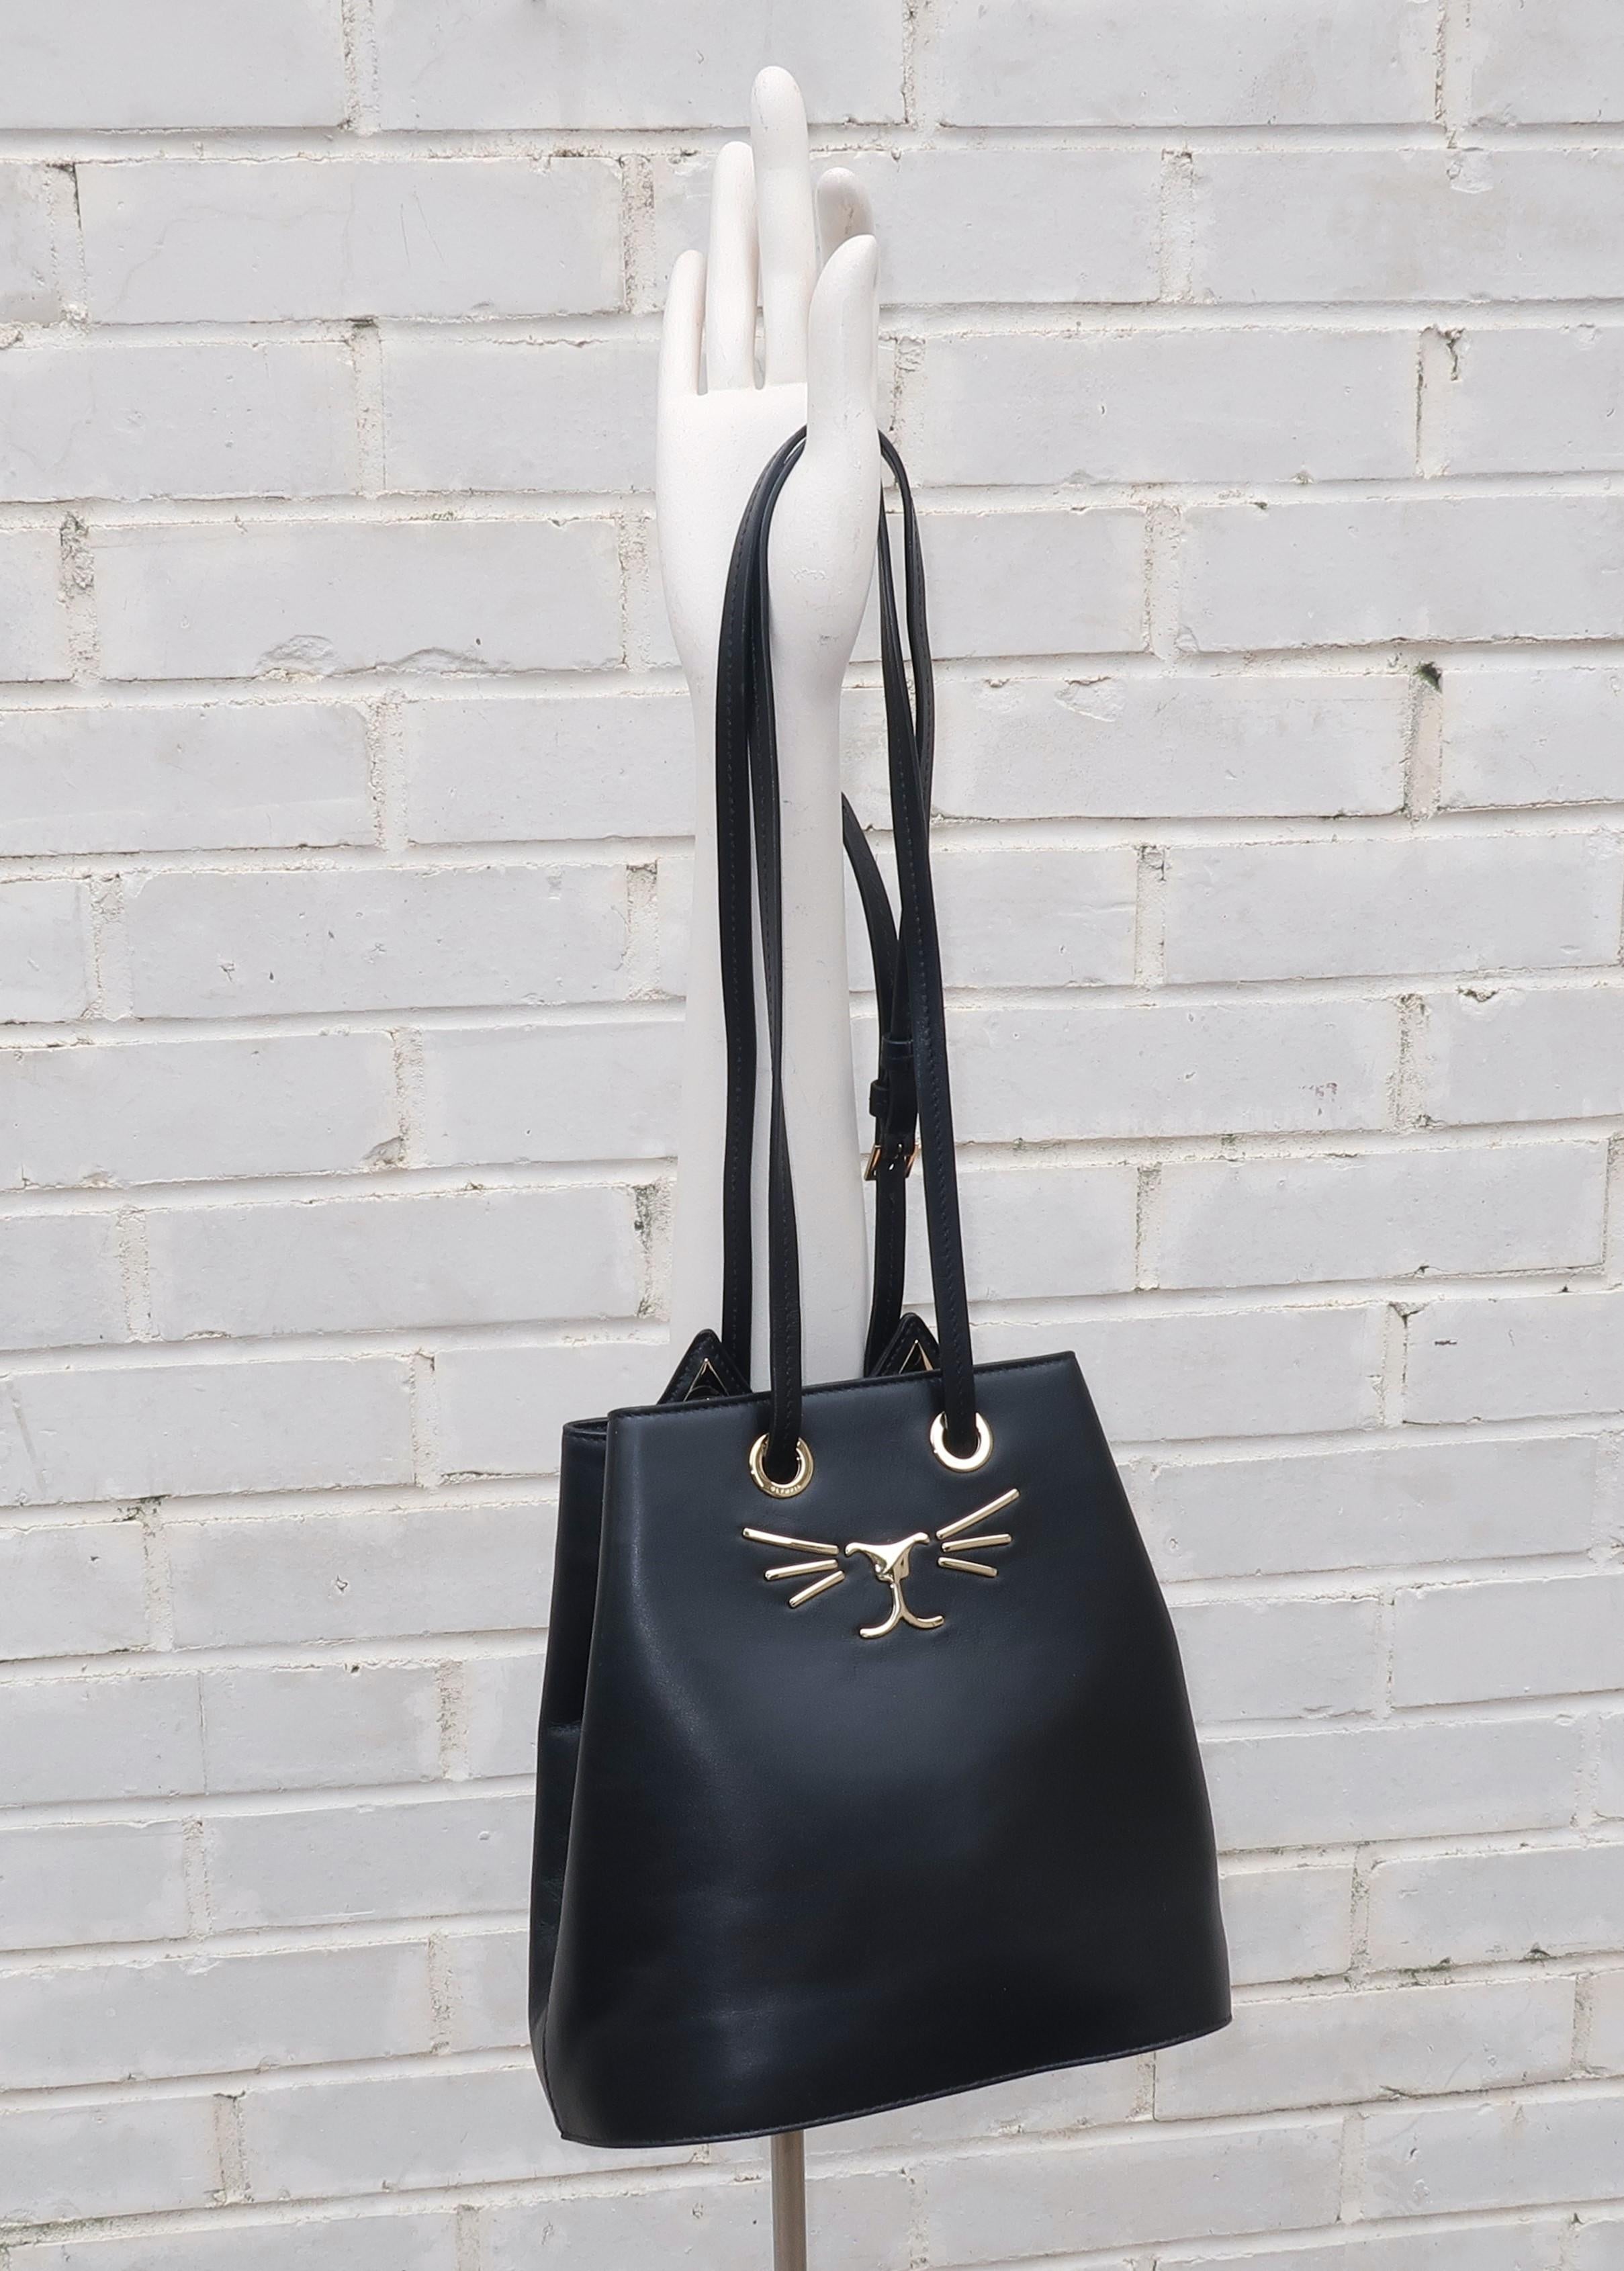 Meow!!!  This Charlotte Olympia black leather handbag is functional and fabulous with a personality driven feline 'kitty' face in shiny brass metal accents and ear silhouettes.  The bucket body and long shoulder strap make this an easy carry and a